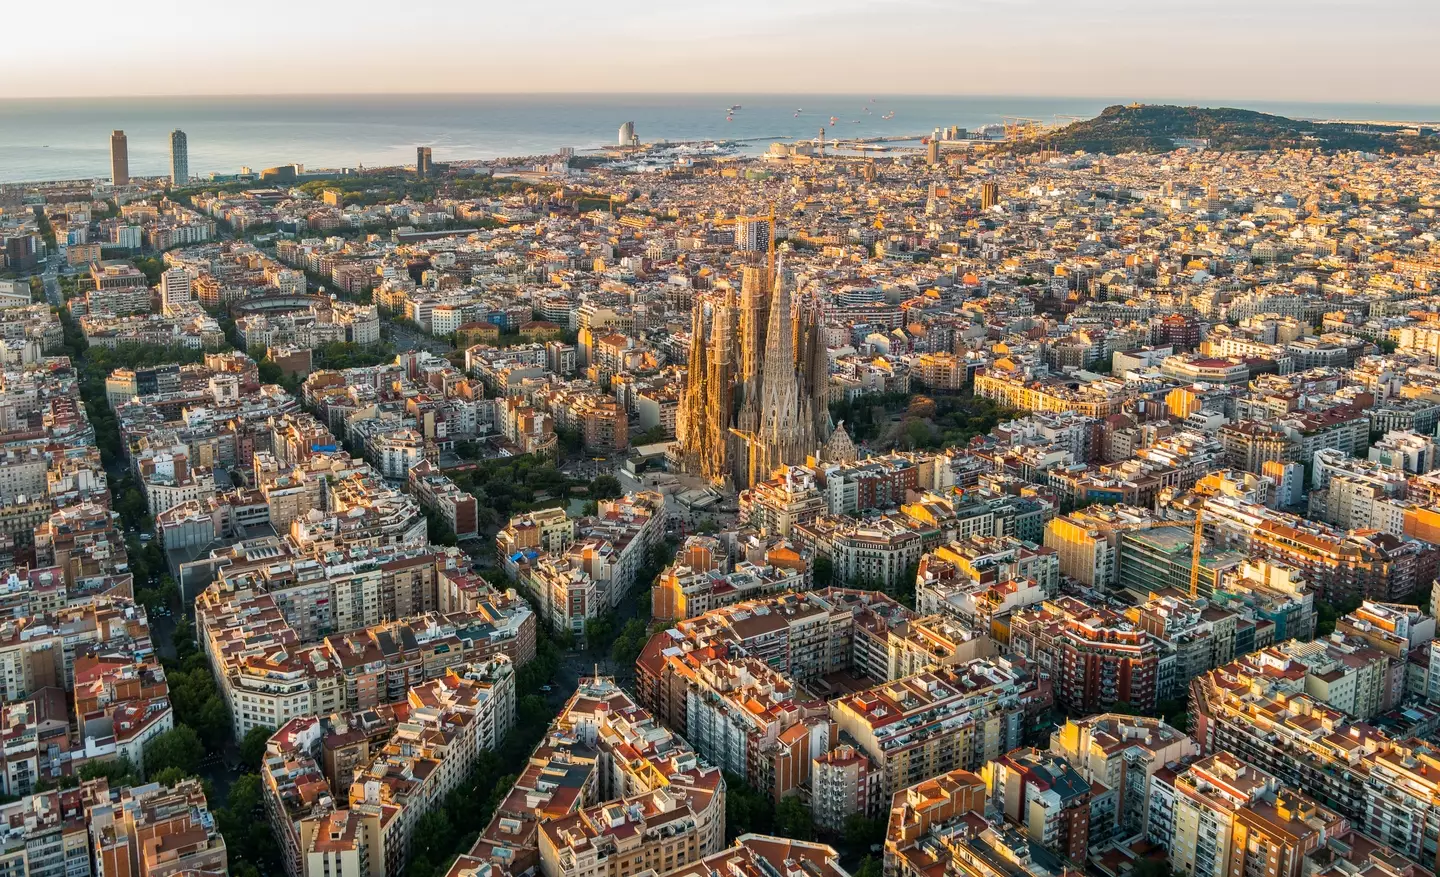 View over Barcelona (Getty Stock Images)